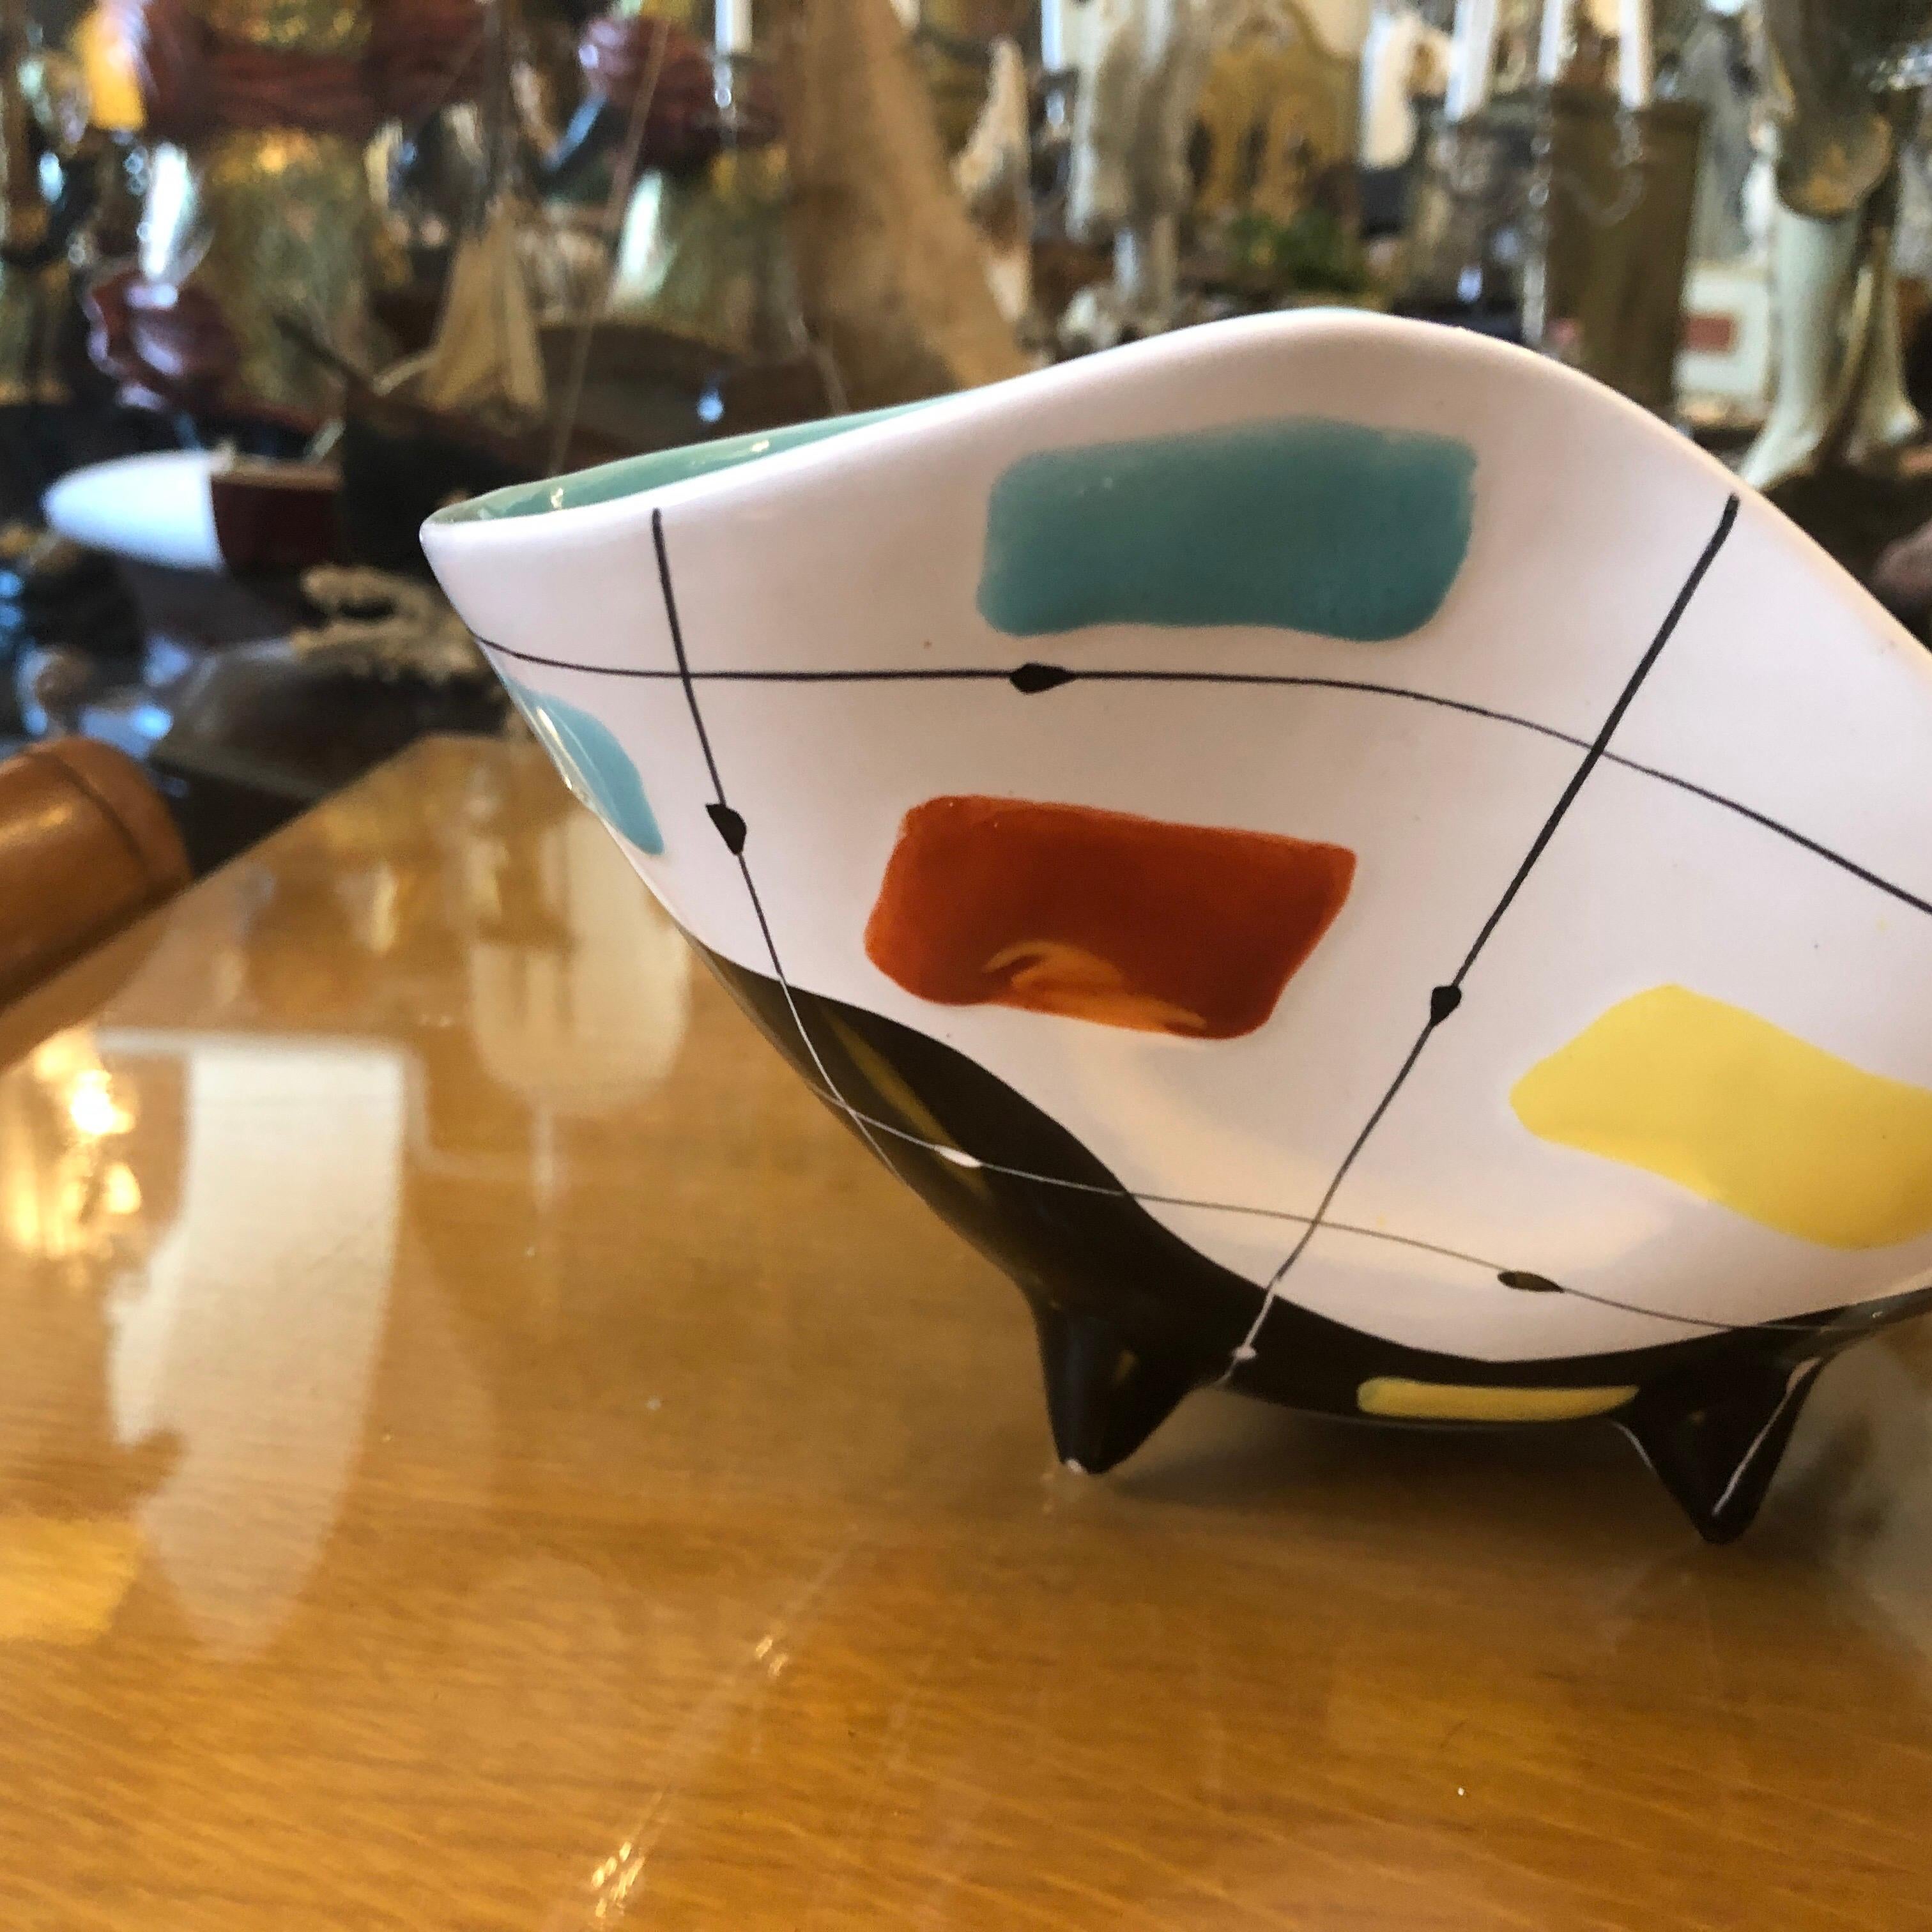 A ceramic bowl made in Italy in the fifties in the small town of Deruta world famous for hand-crafted ceramics. The amazing fifties style decorated ceramic is in perfect conditions.